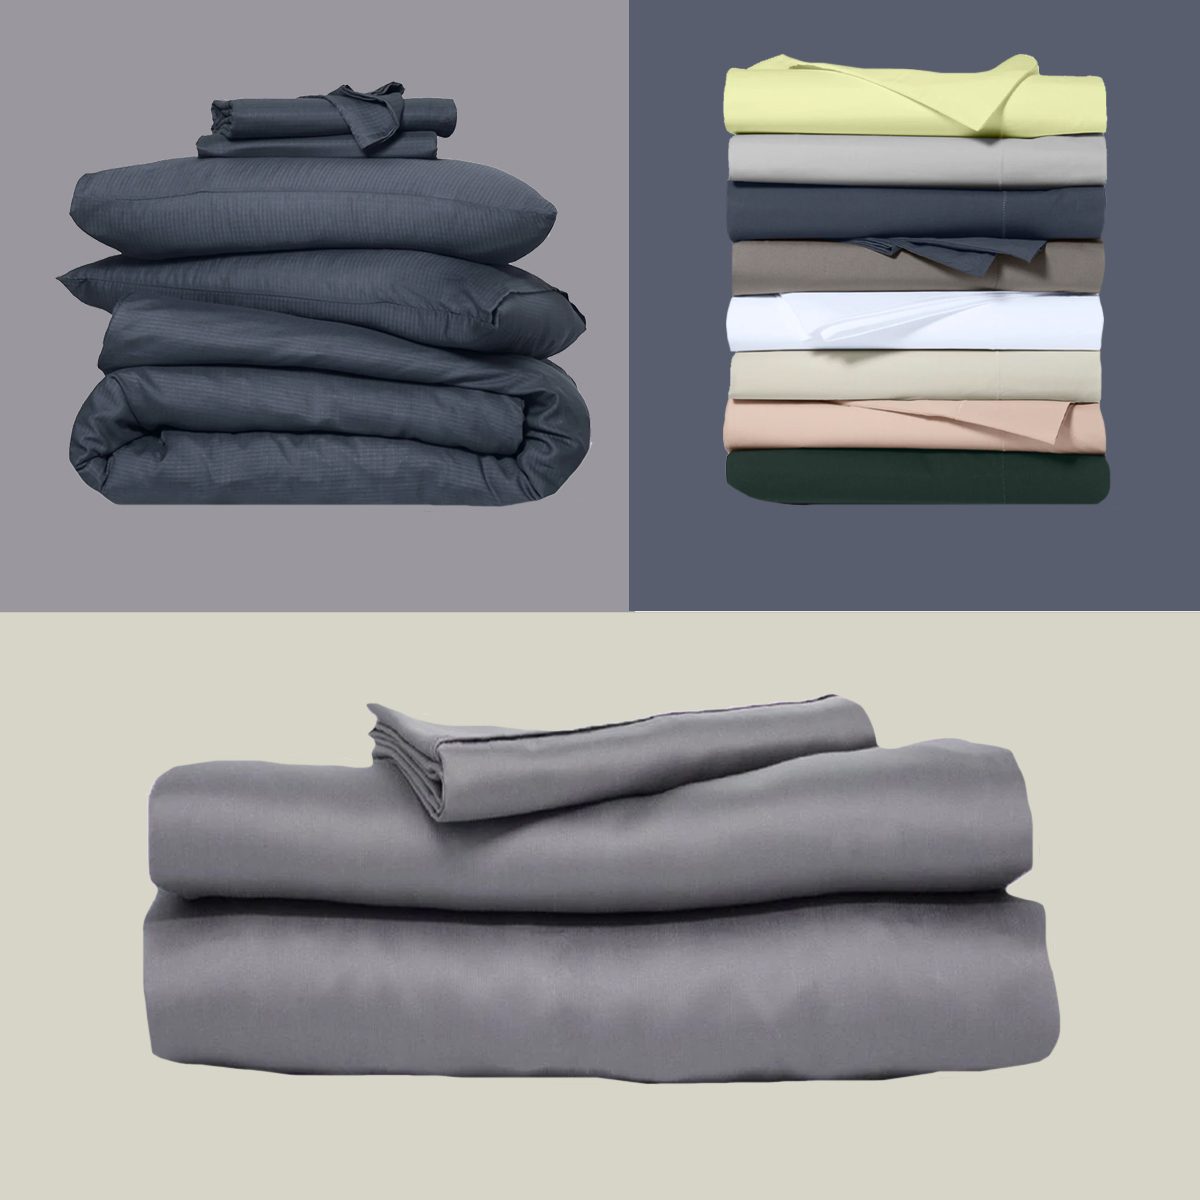 What is the best thread count for bed sheets Experts uncover the ideal number for the perfect slumber